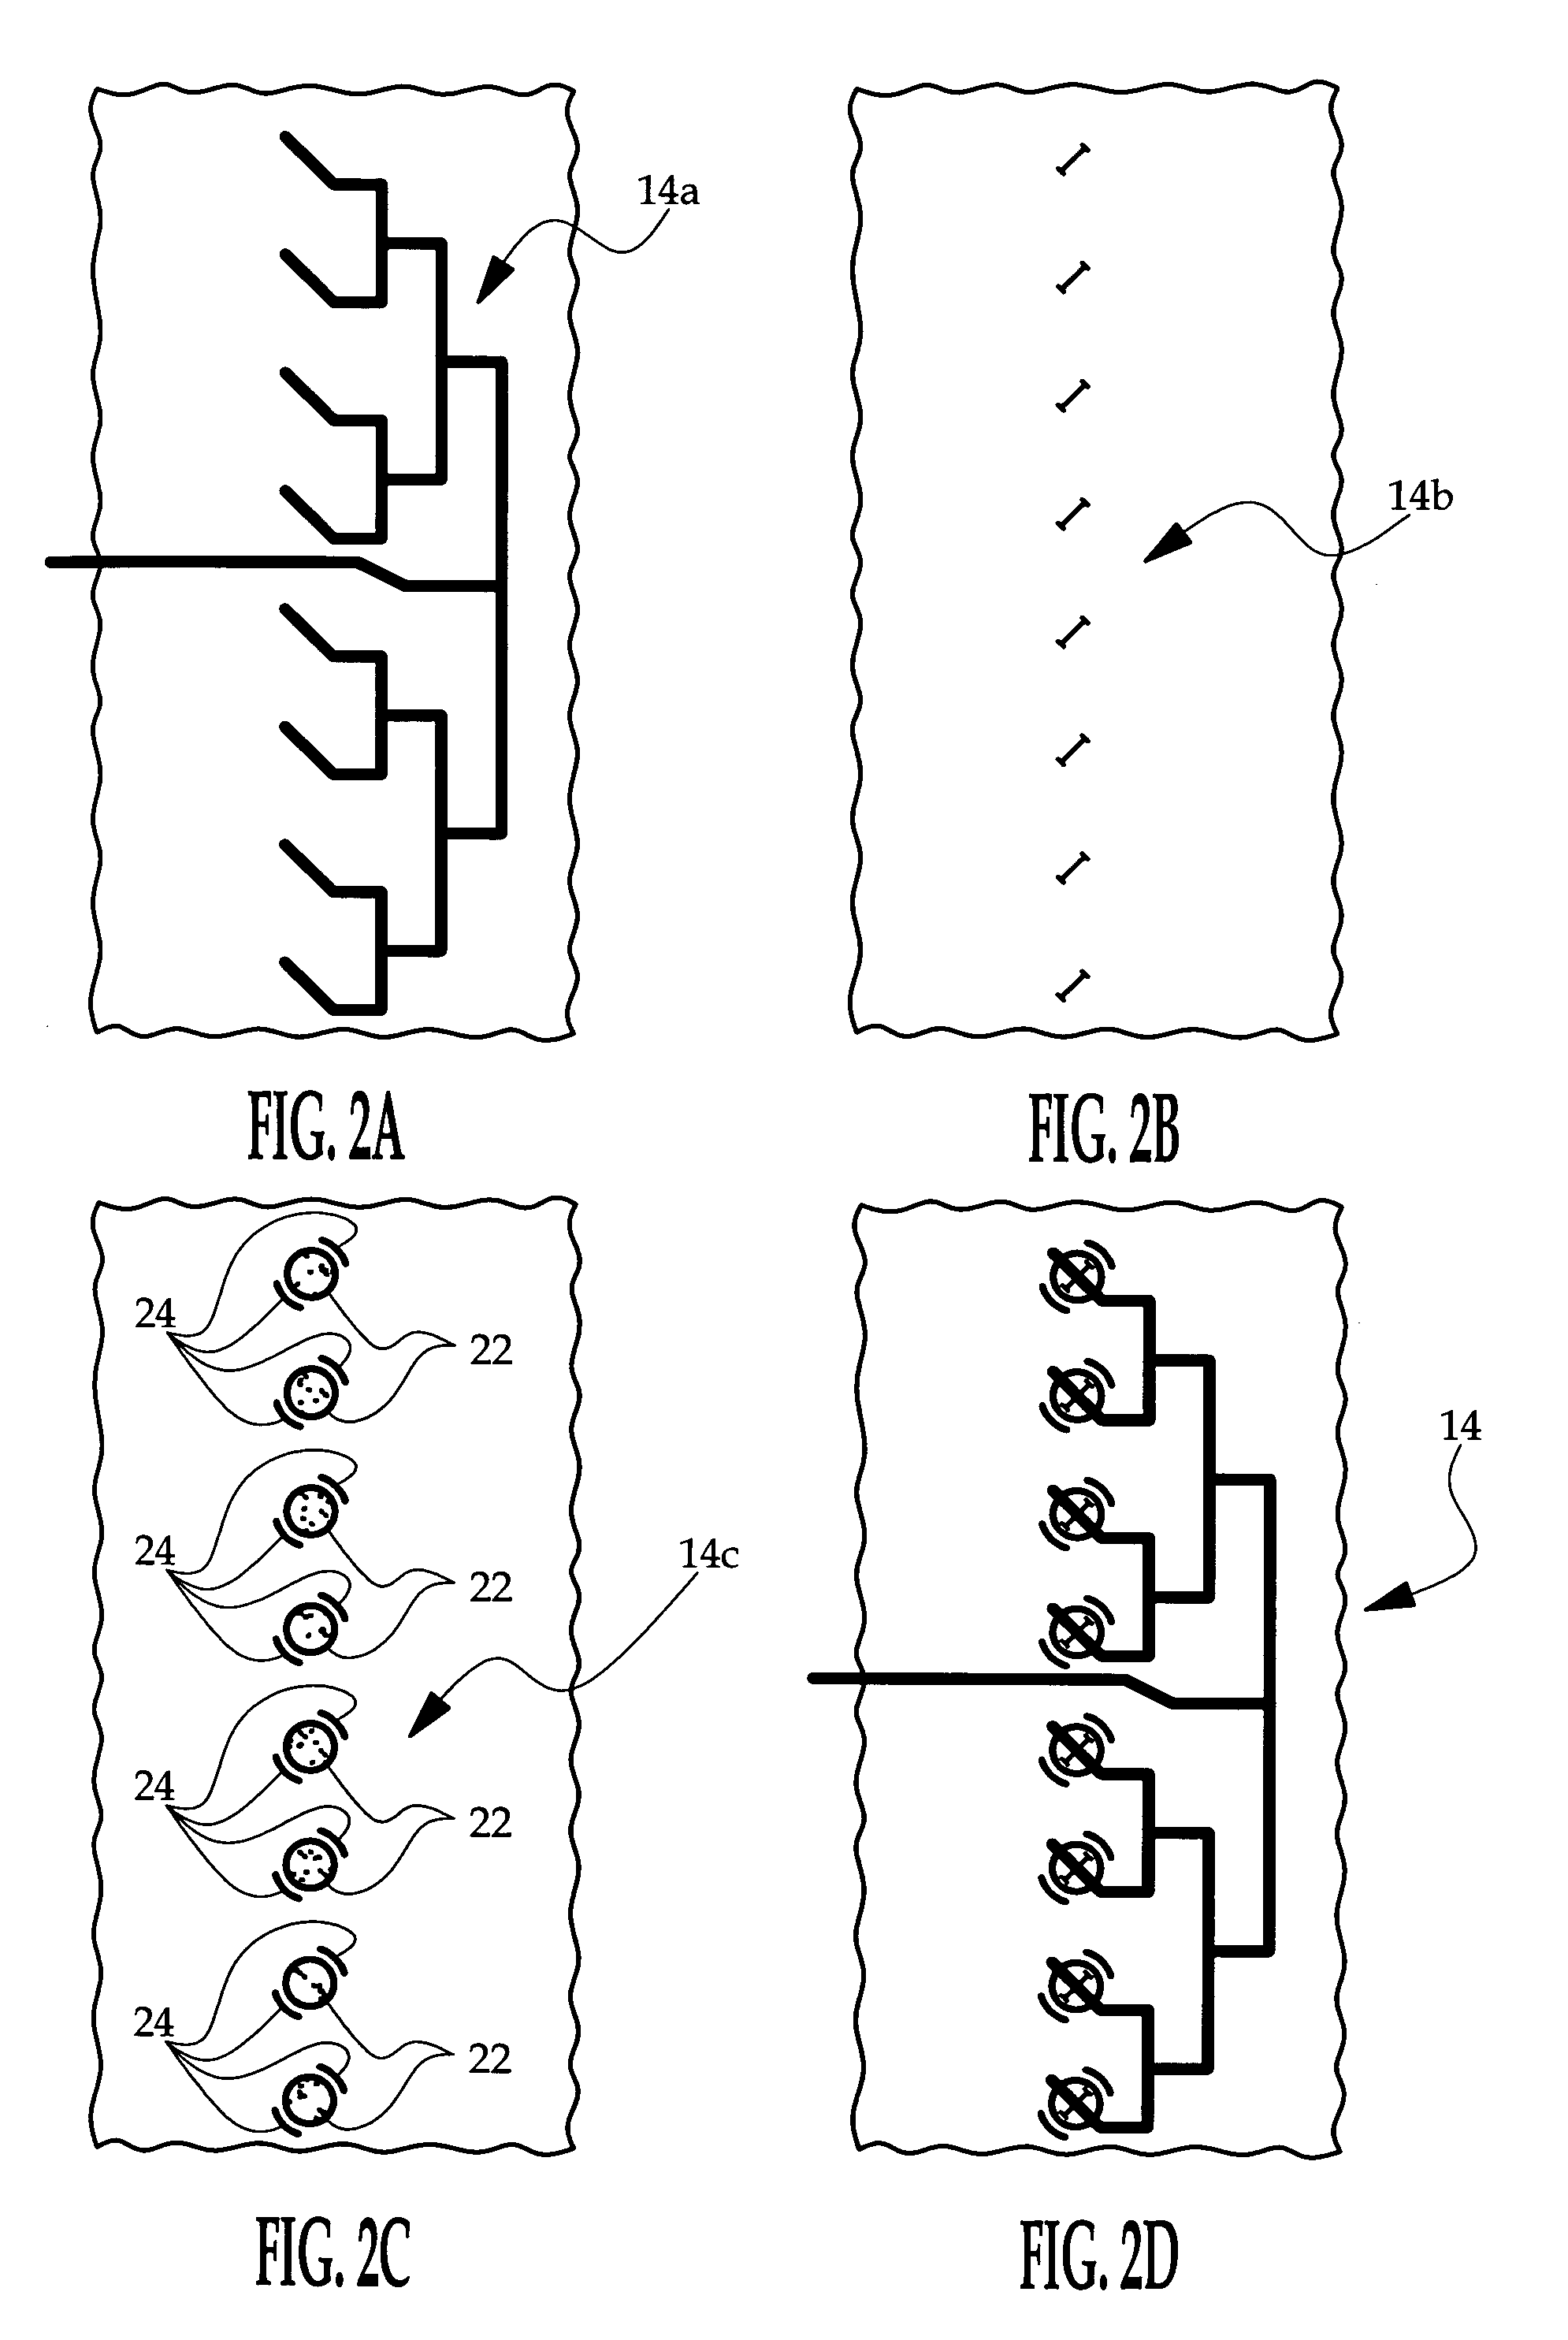 Linear polarization planar microstrip antenna array with circular patch elements and co-planar annular sector parasitic strips